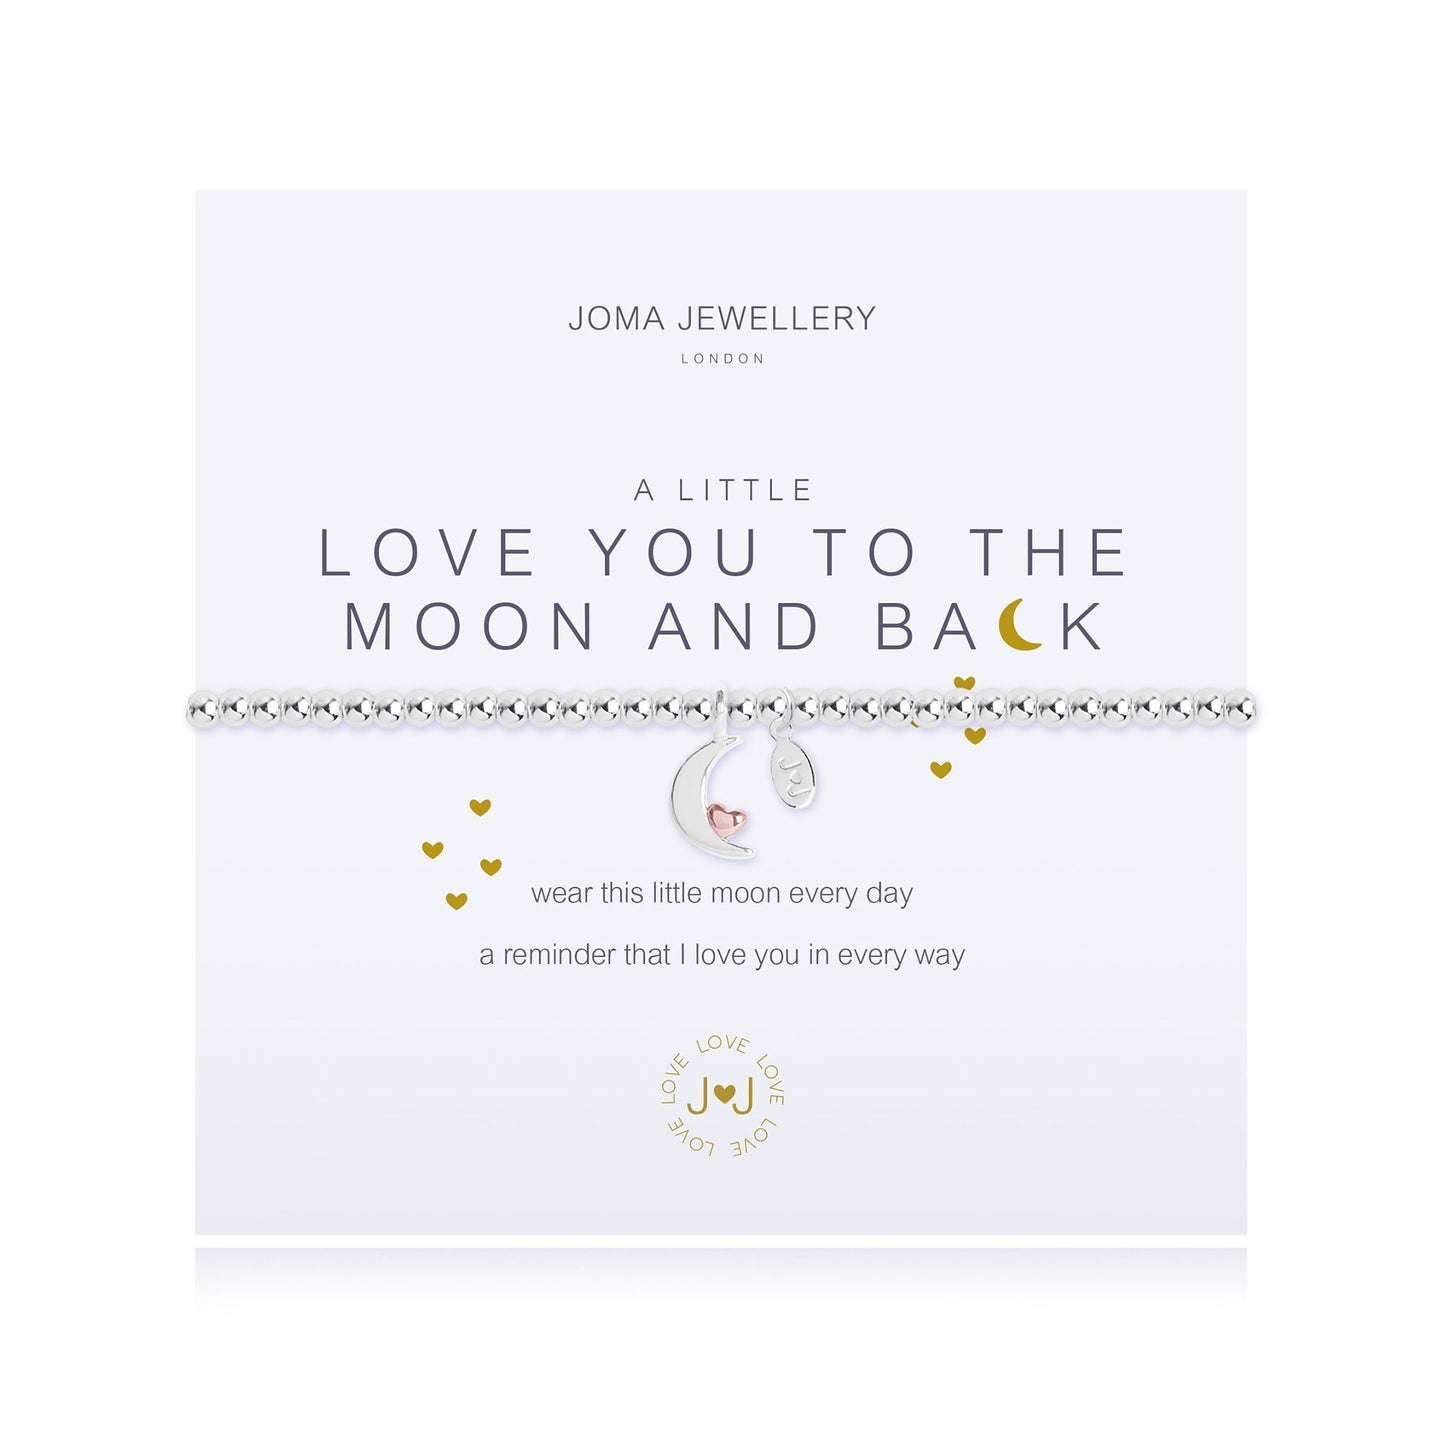 Joma Jewellery 'A Little Love You To The Moon And Back' Bracelet